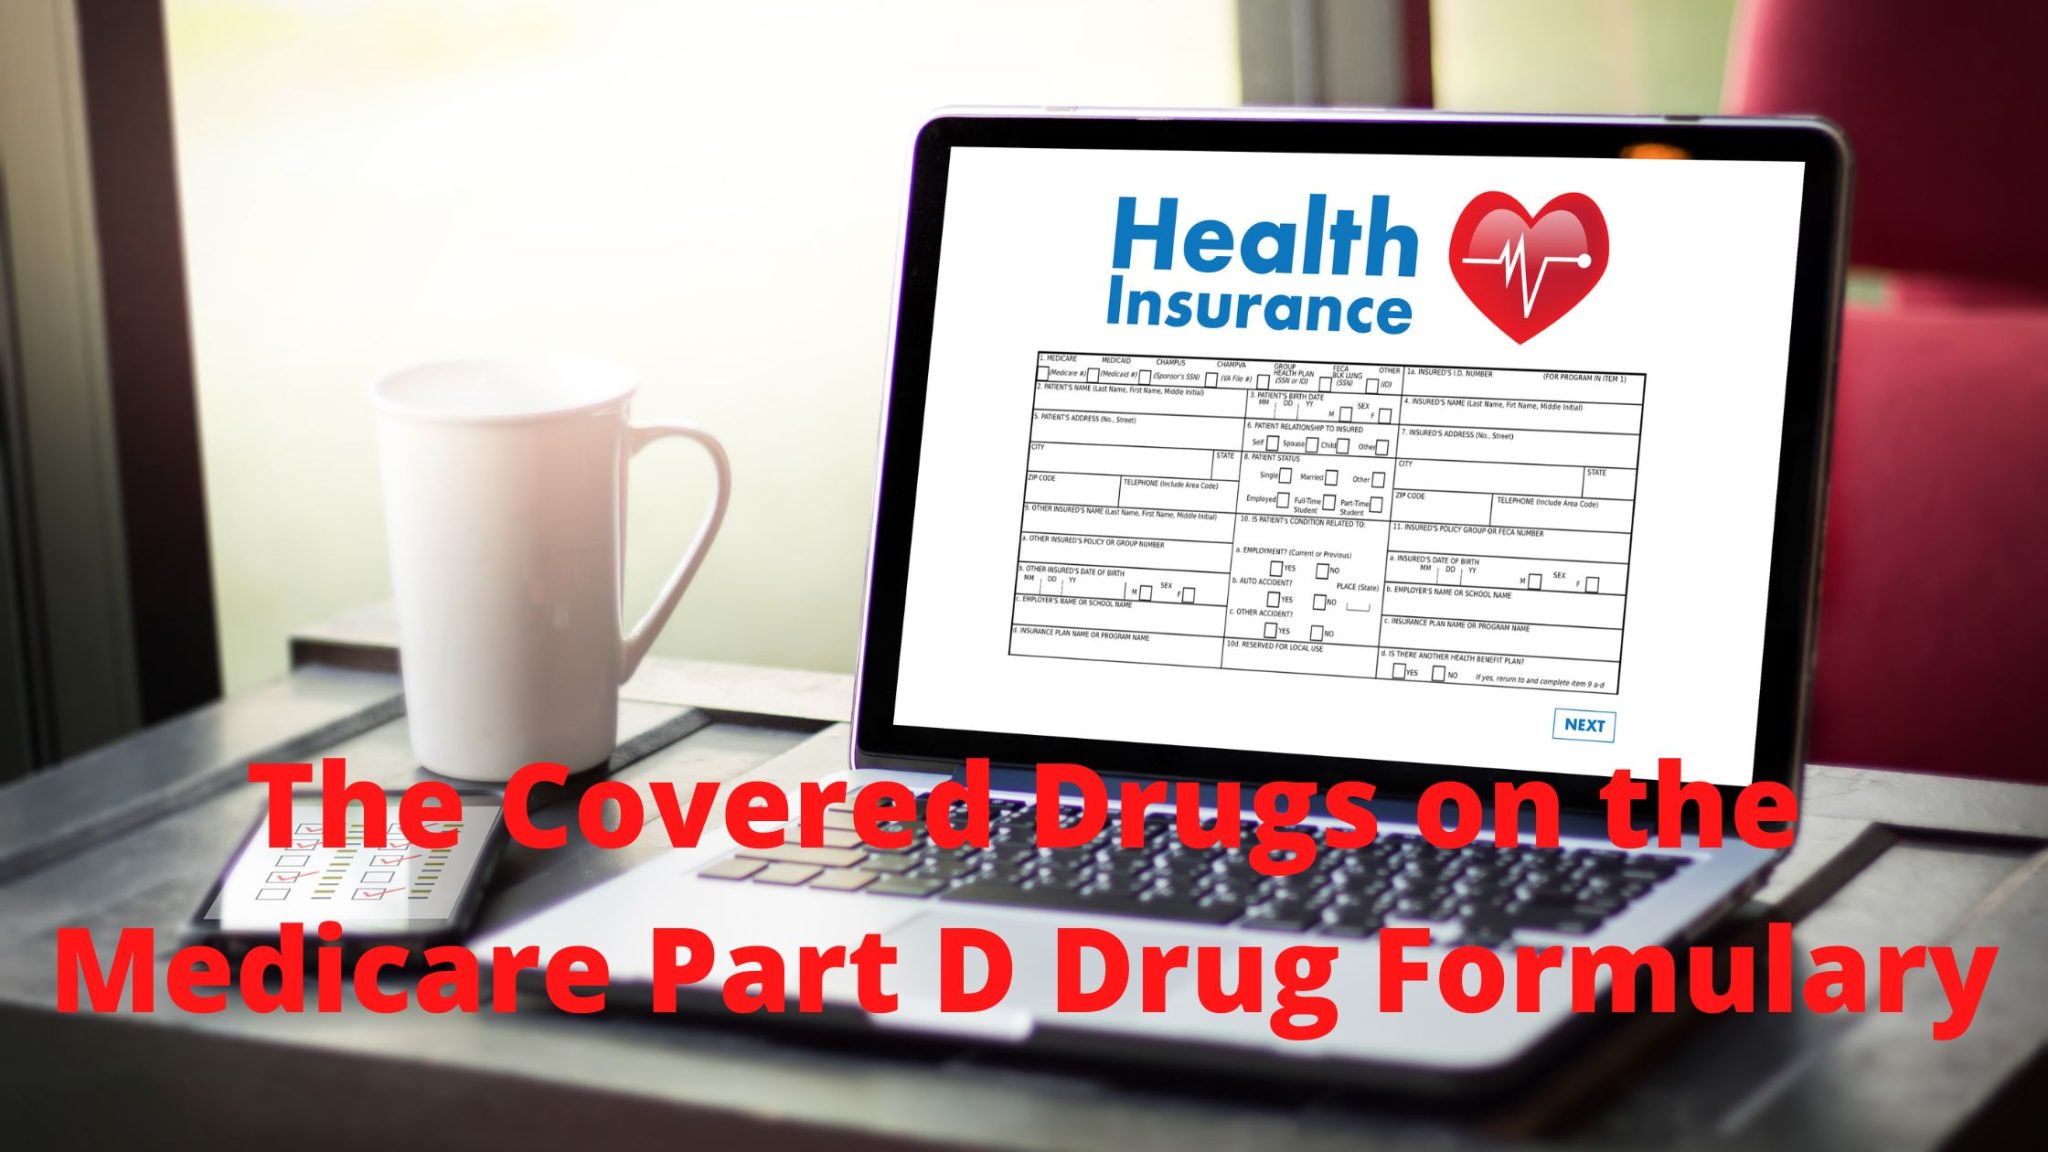 The Complete Guide to Covered Drugs on Medicare Part D Drug Formulary